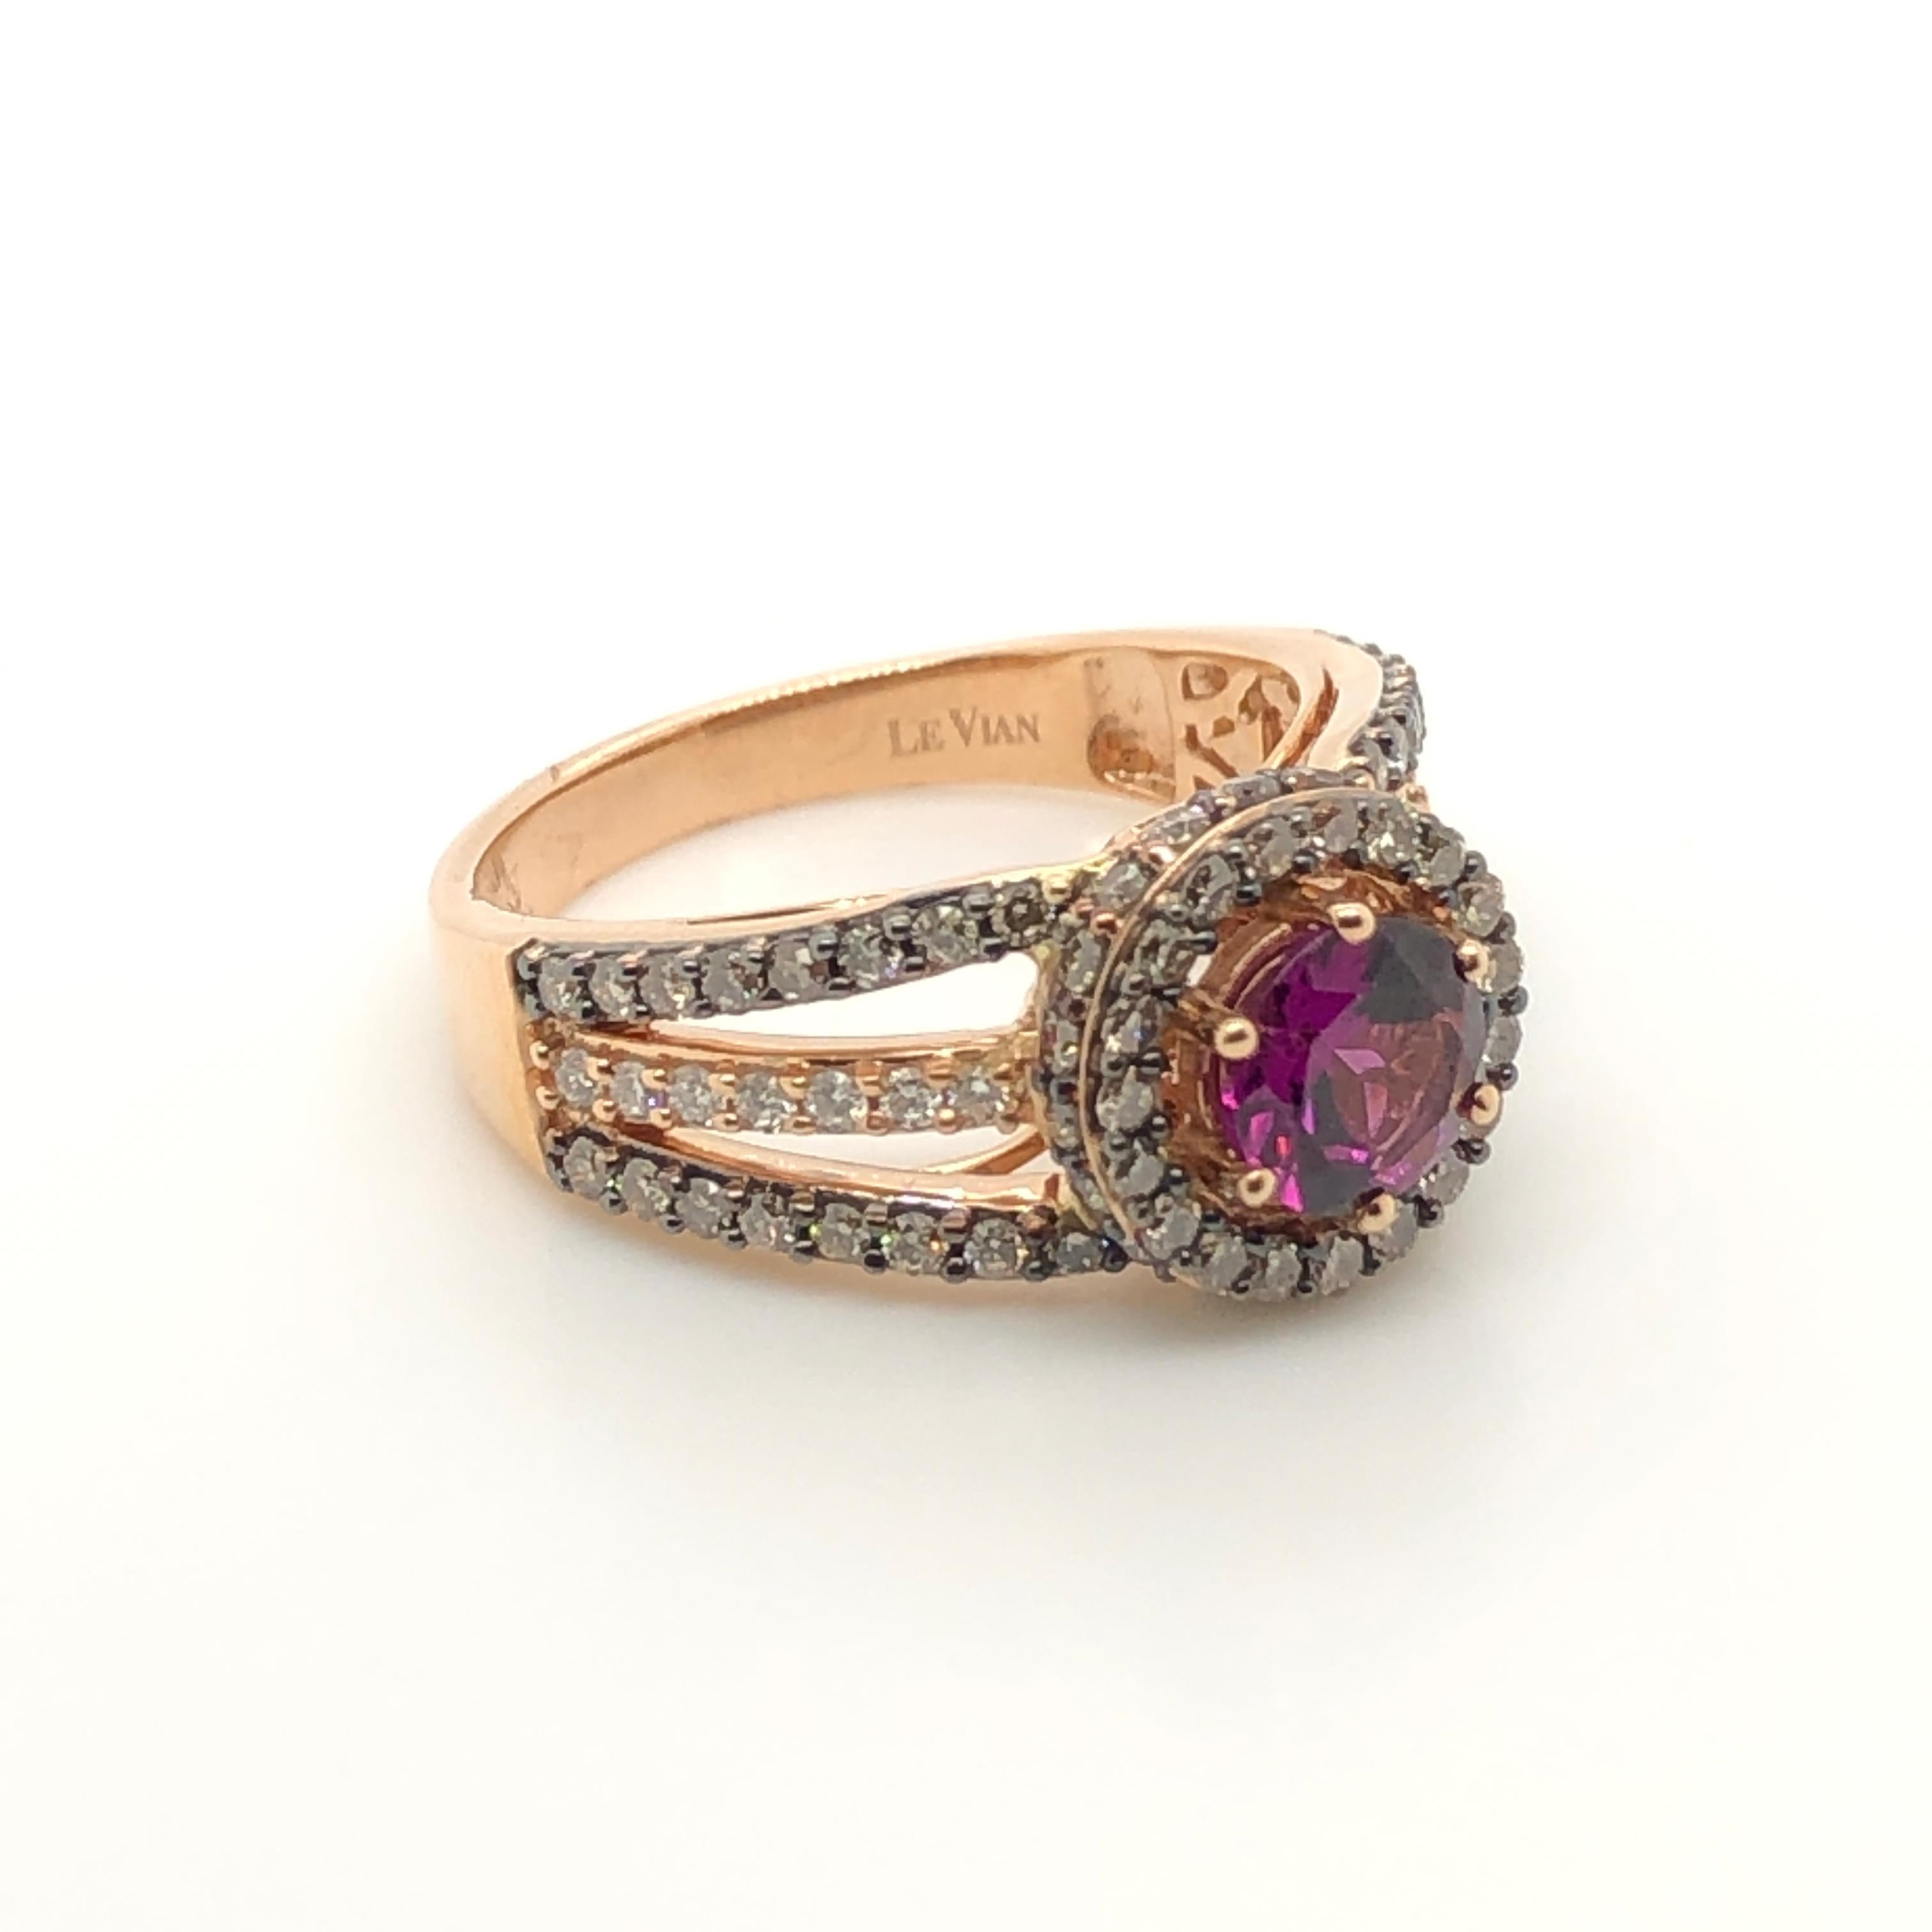 The color of royalty is brilliantly displayed in this 14k rose gold Le Vian Chocolatier ring featuring a 1-carat round Purple garnet nestled within a Chocolate Diamonds halo, banded with Chocolate Diamonds and Vanilla Diamonds. (3/4 ct t.w.